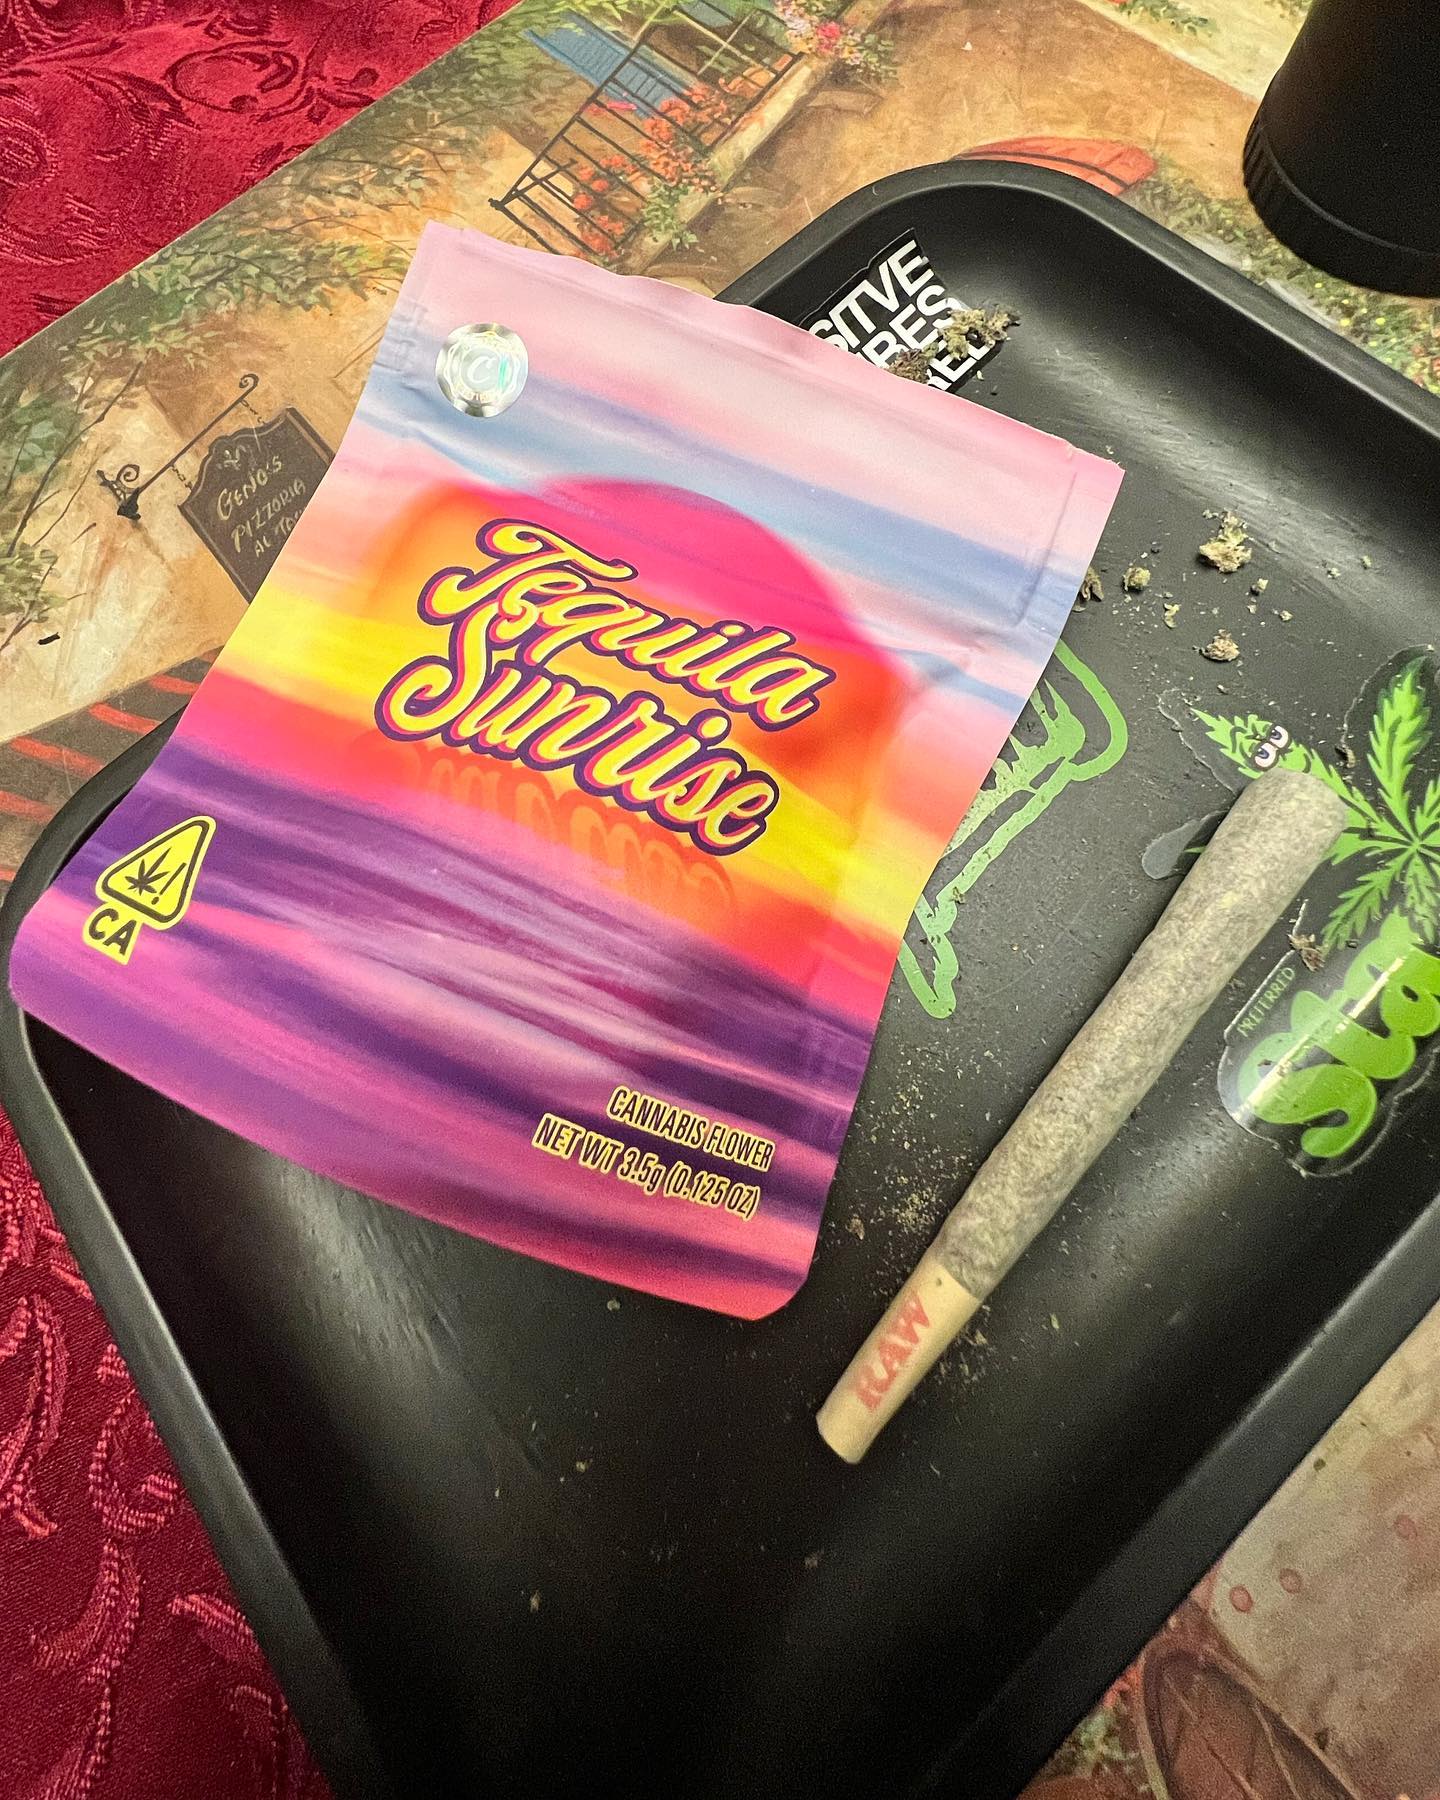 tequila sunrise by cookies international strain review by thecannaisseurking 2